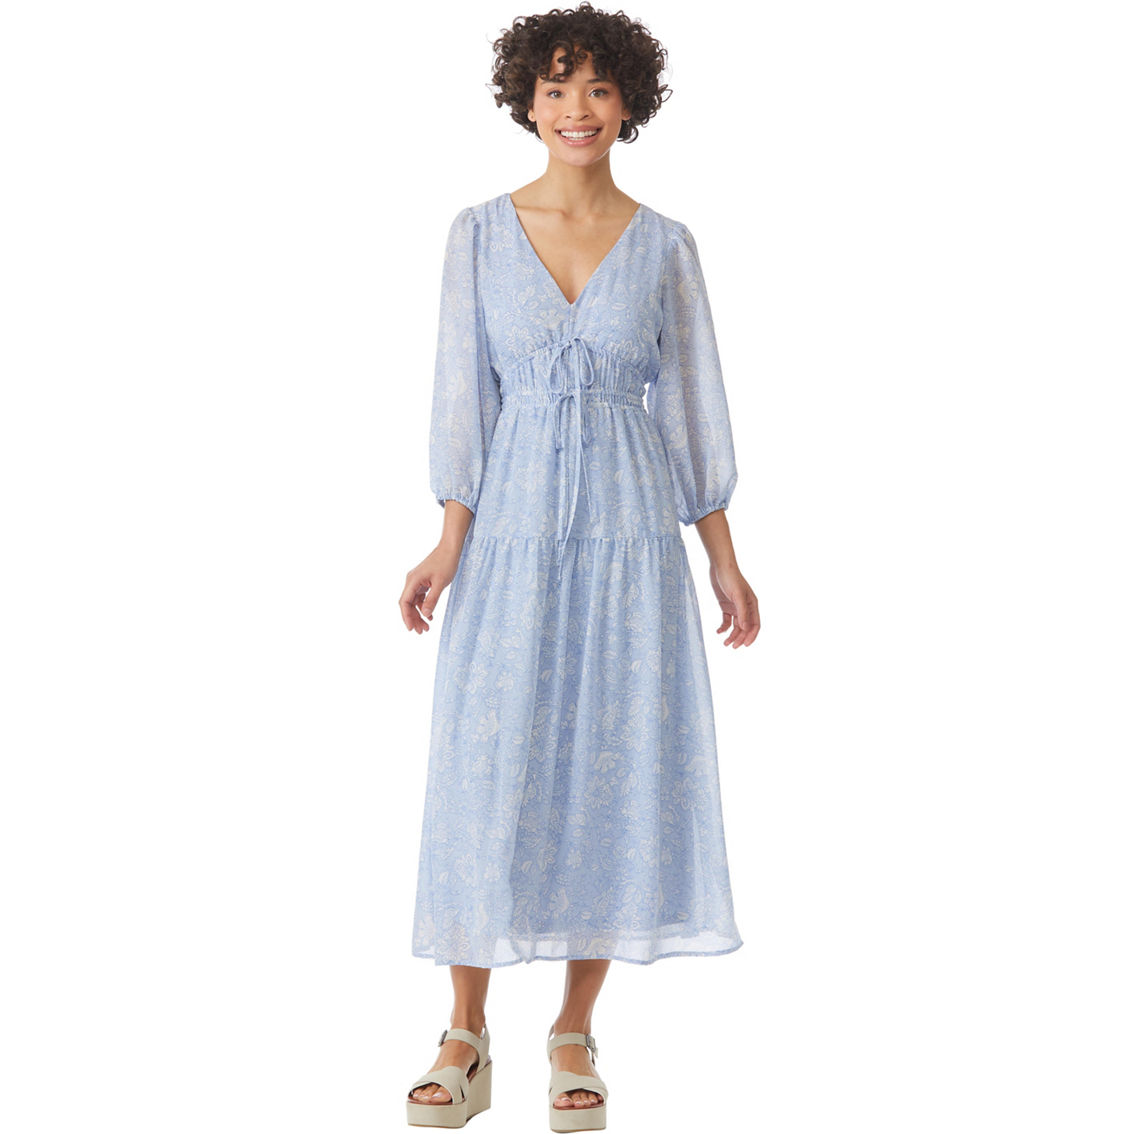 WallFlower Juniors Peasant Midi Dress in Blue with a White Boho Folk Floral - Image 3 of 3